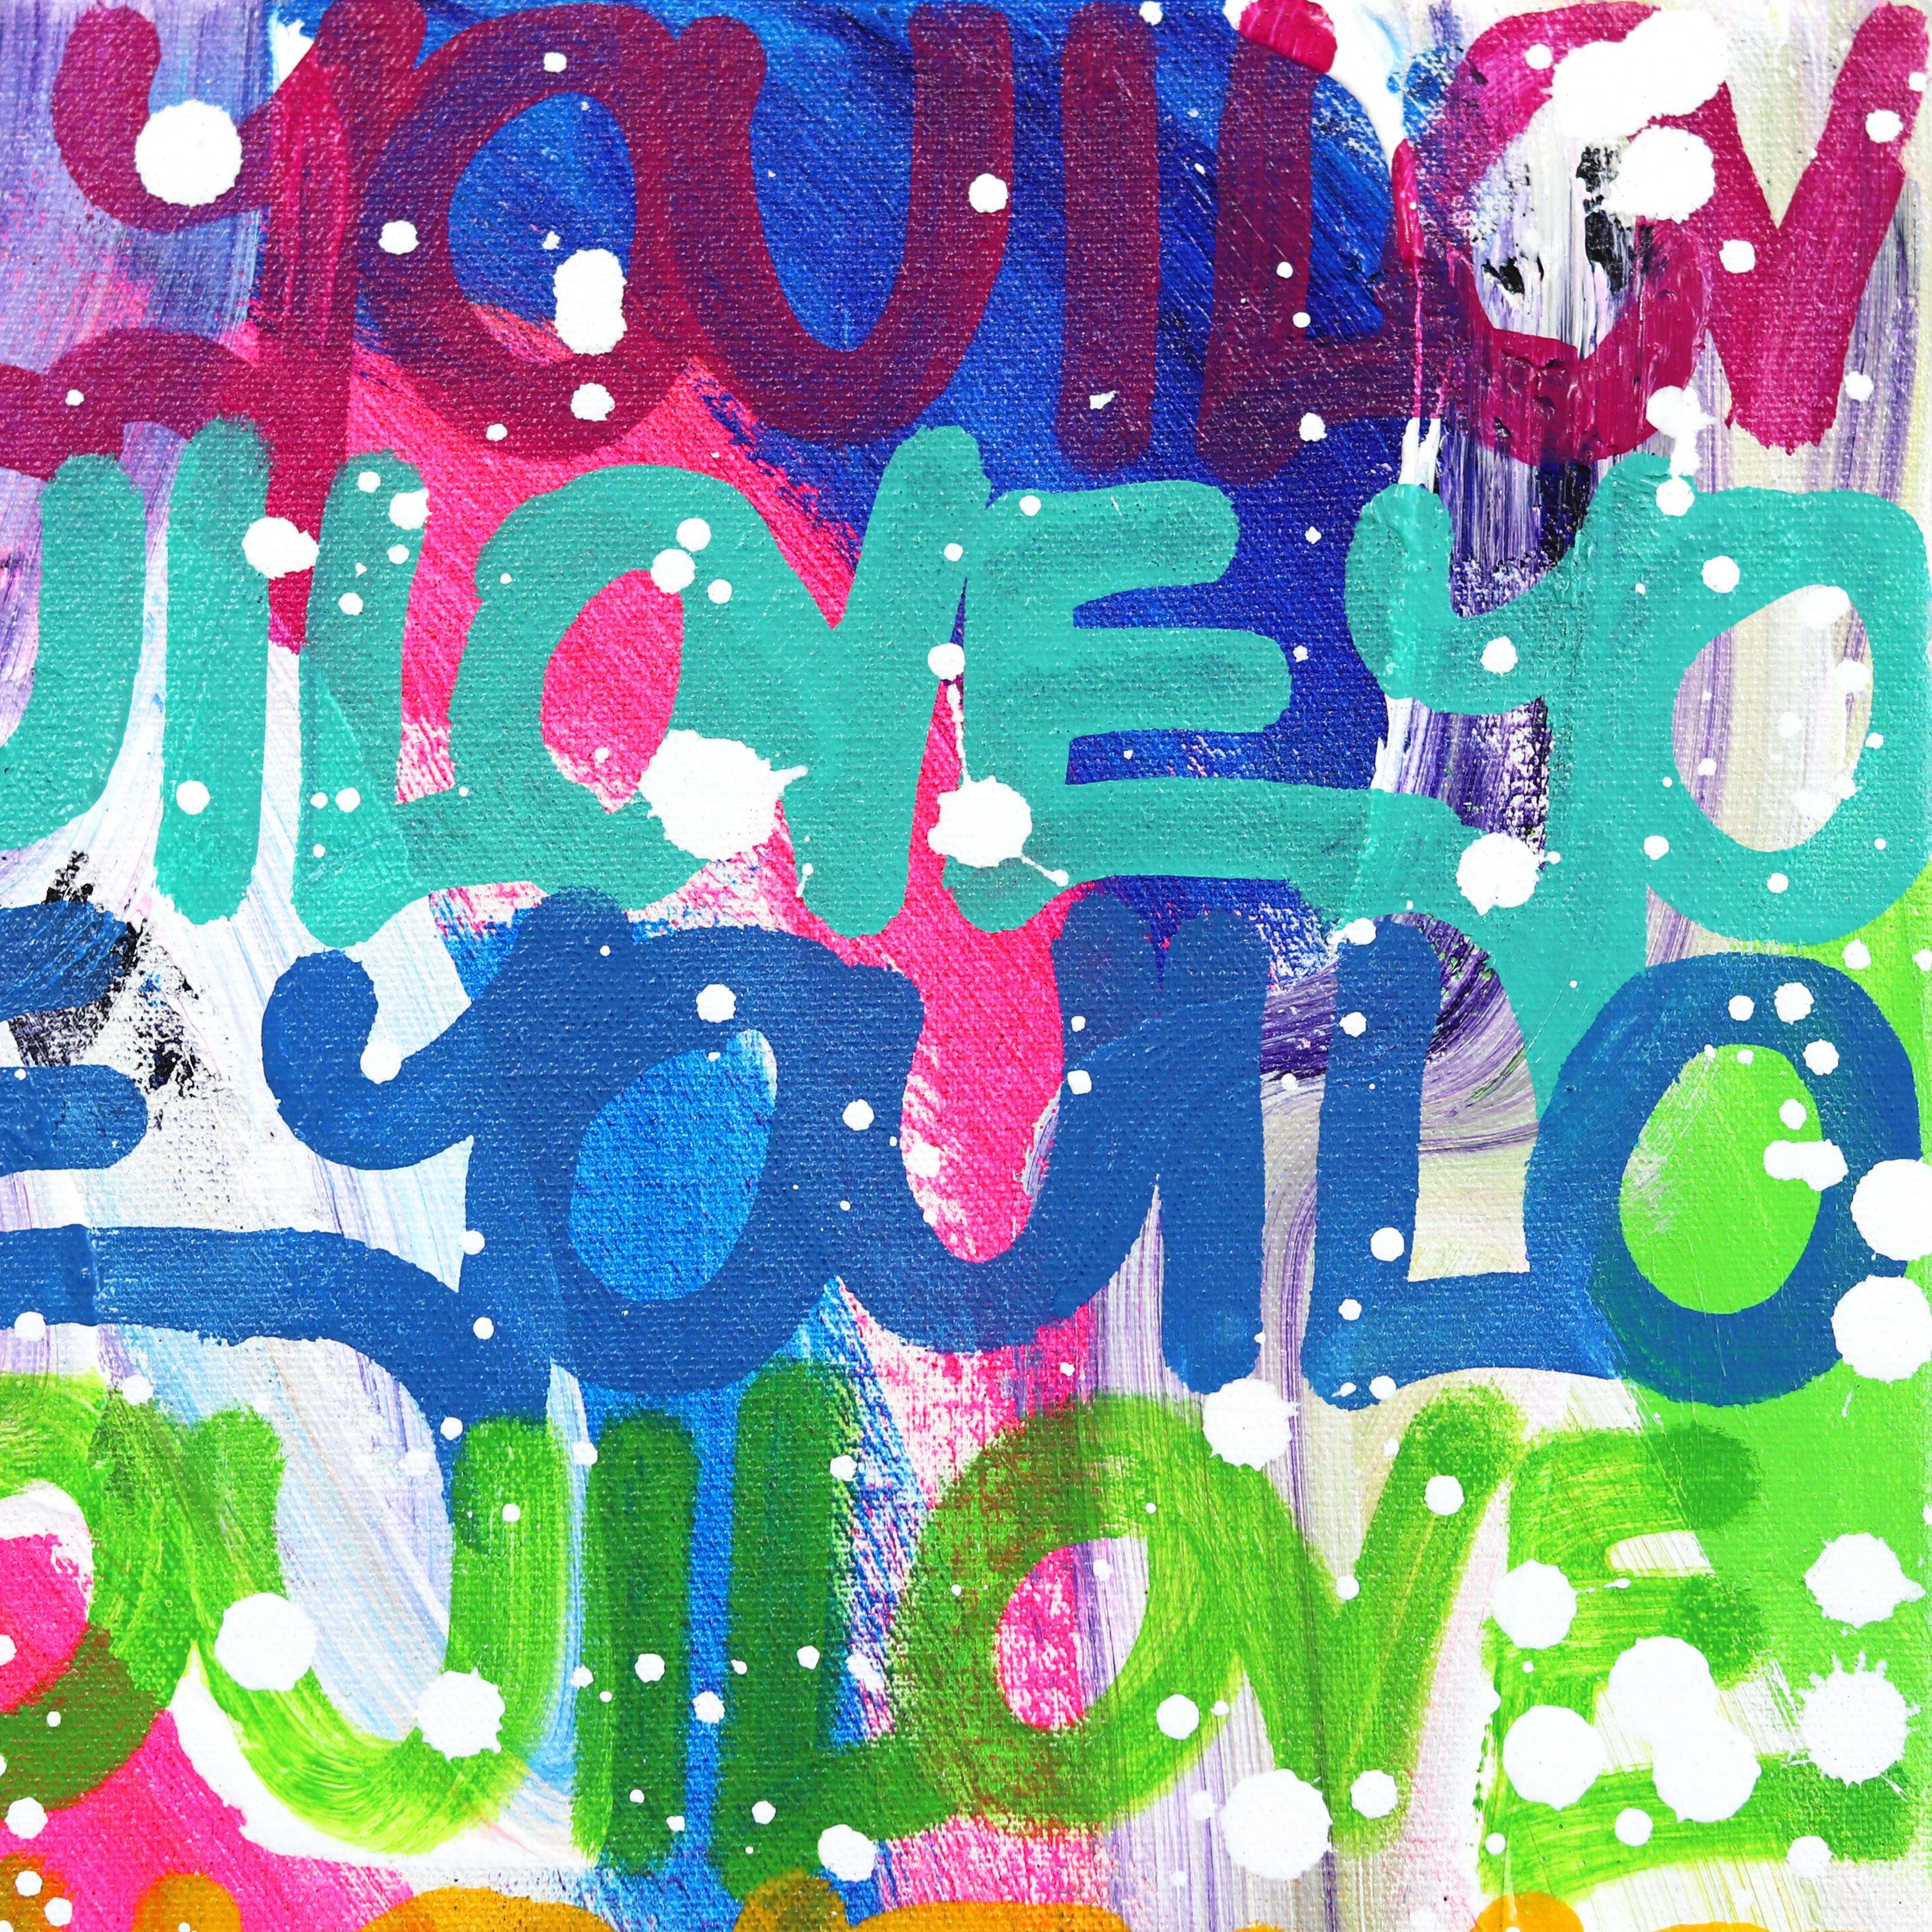 Show Your Colorful Side - Colorful Original Love Graffiti Painting on Canvas For Sale 2